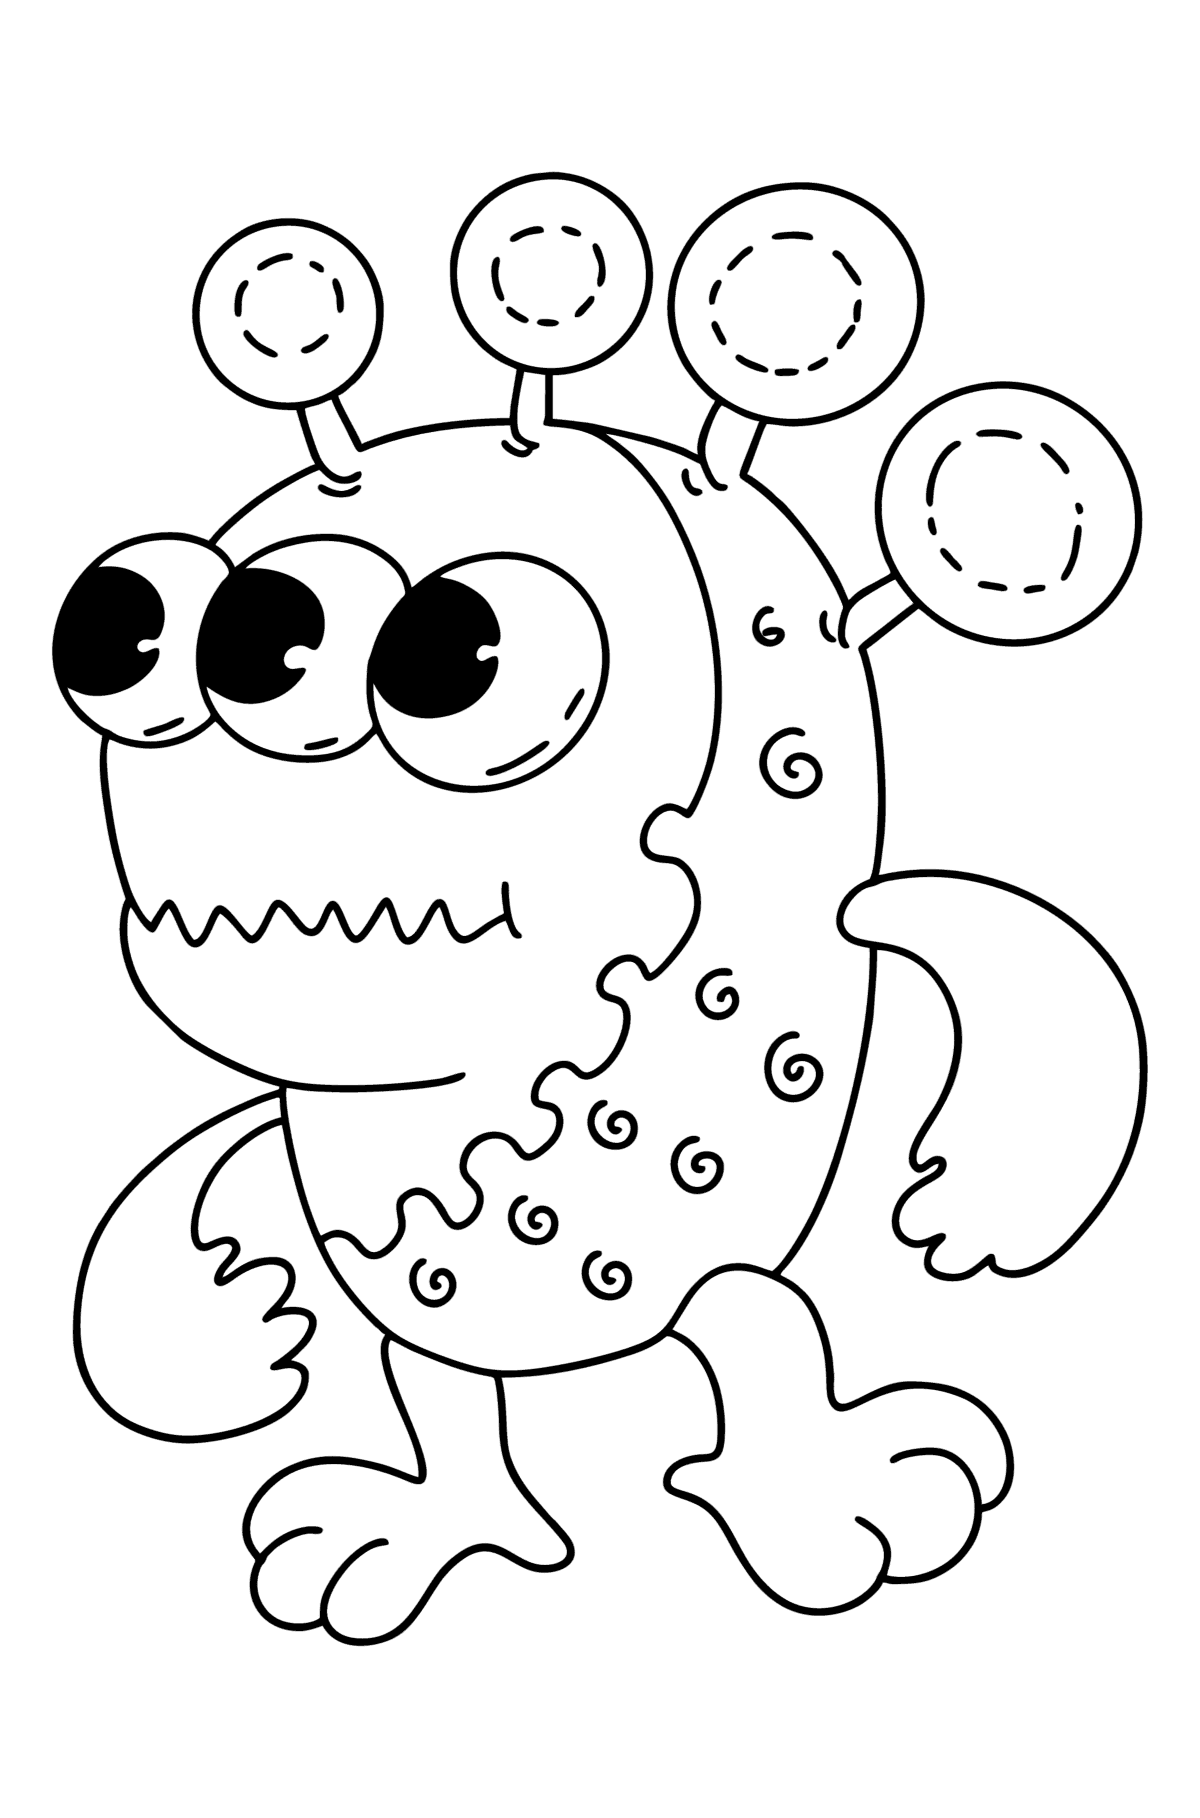 Funny Alien Coloring page - Coloring Pages for Kids